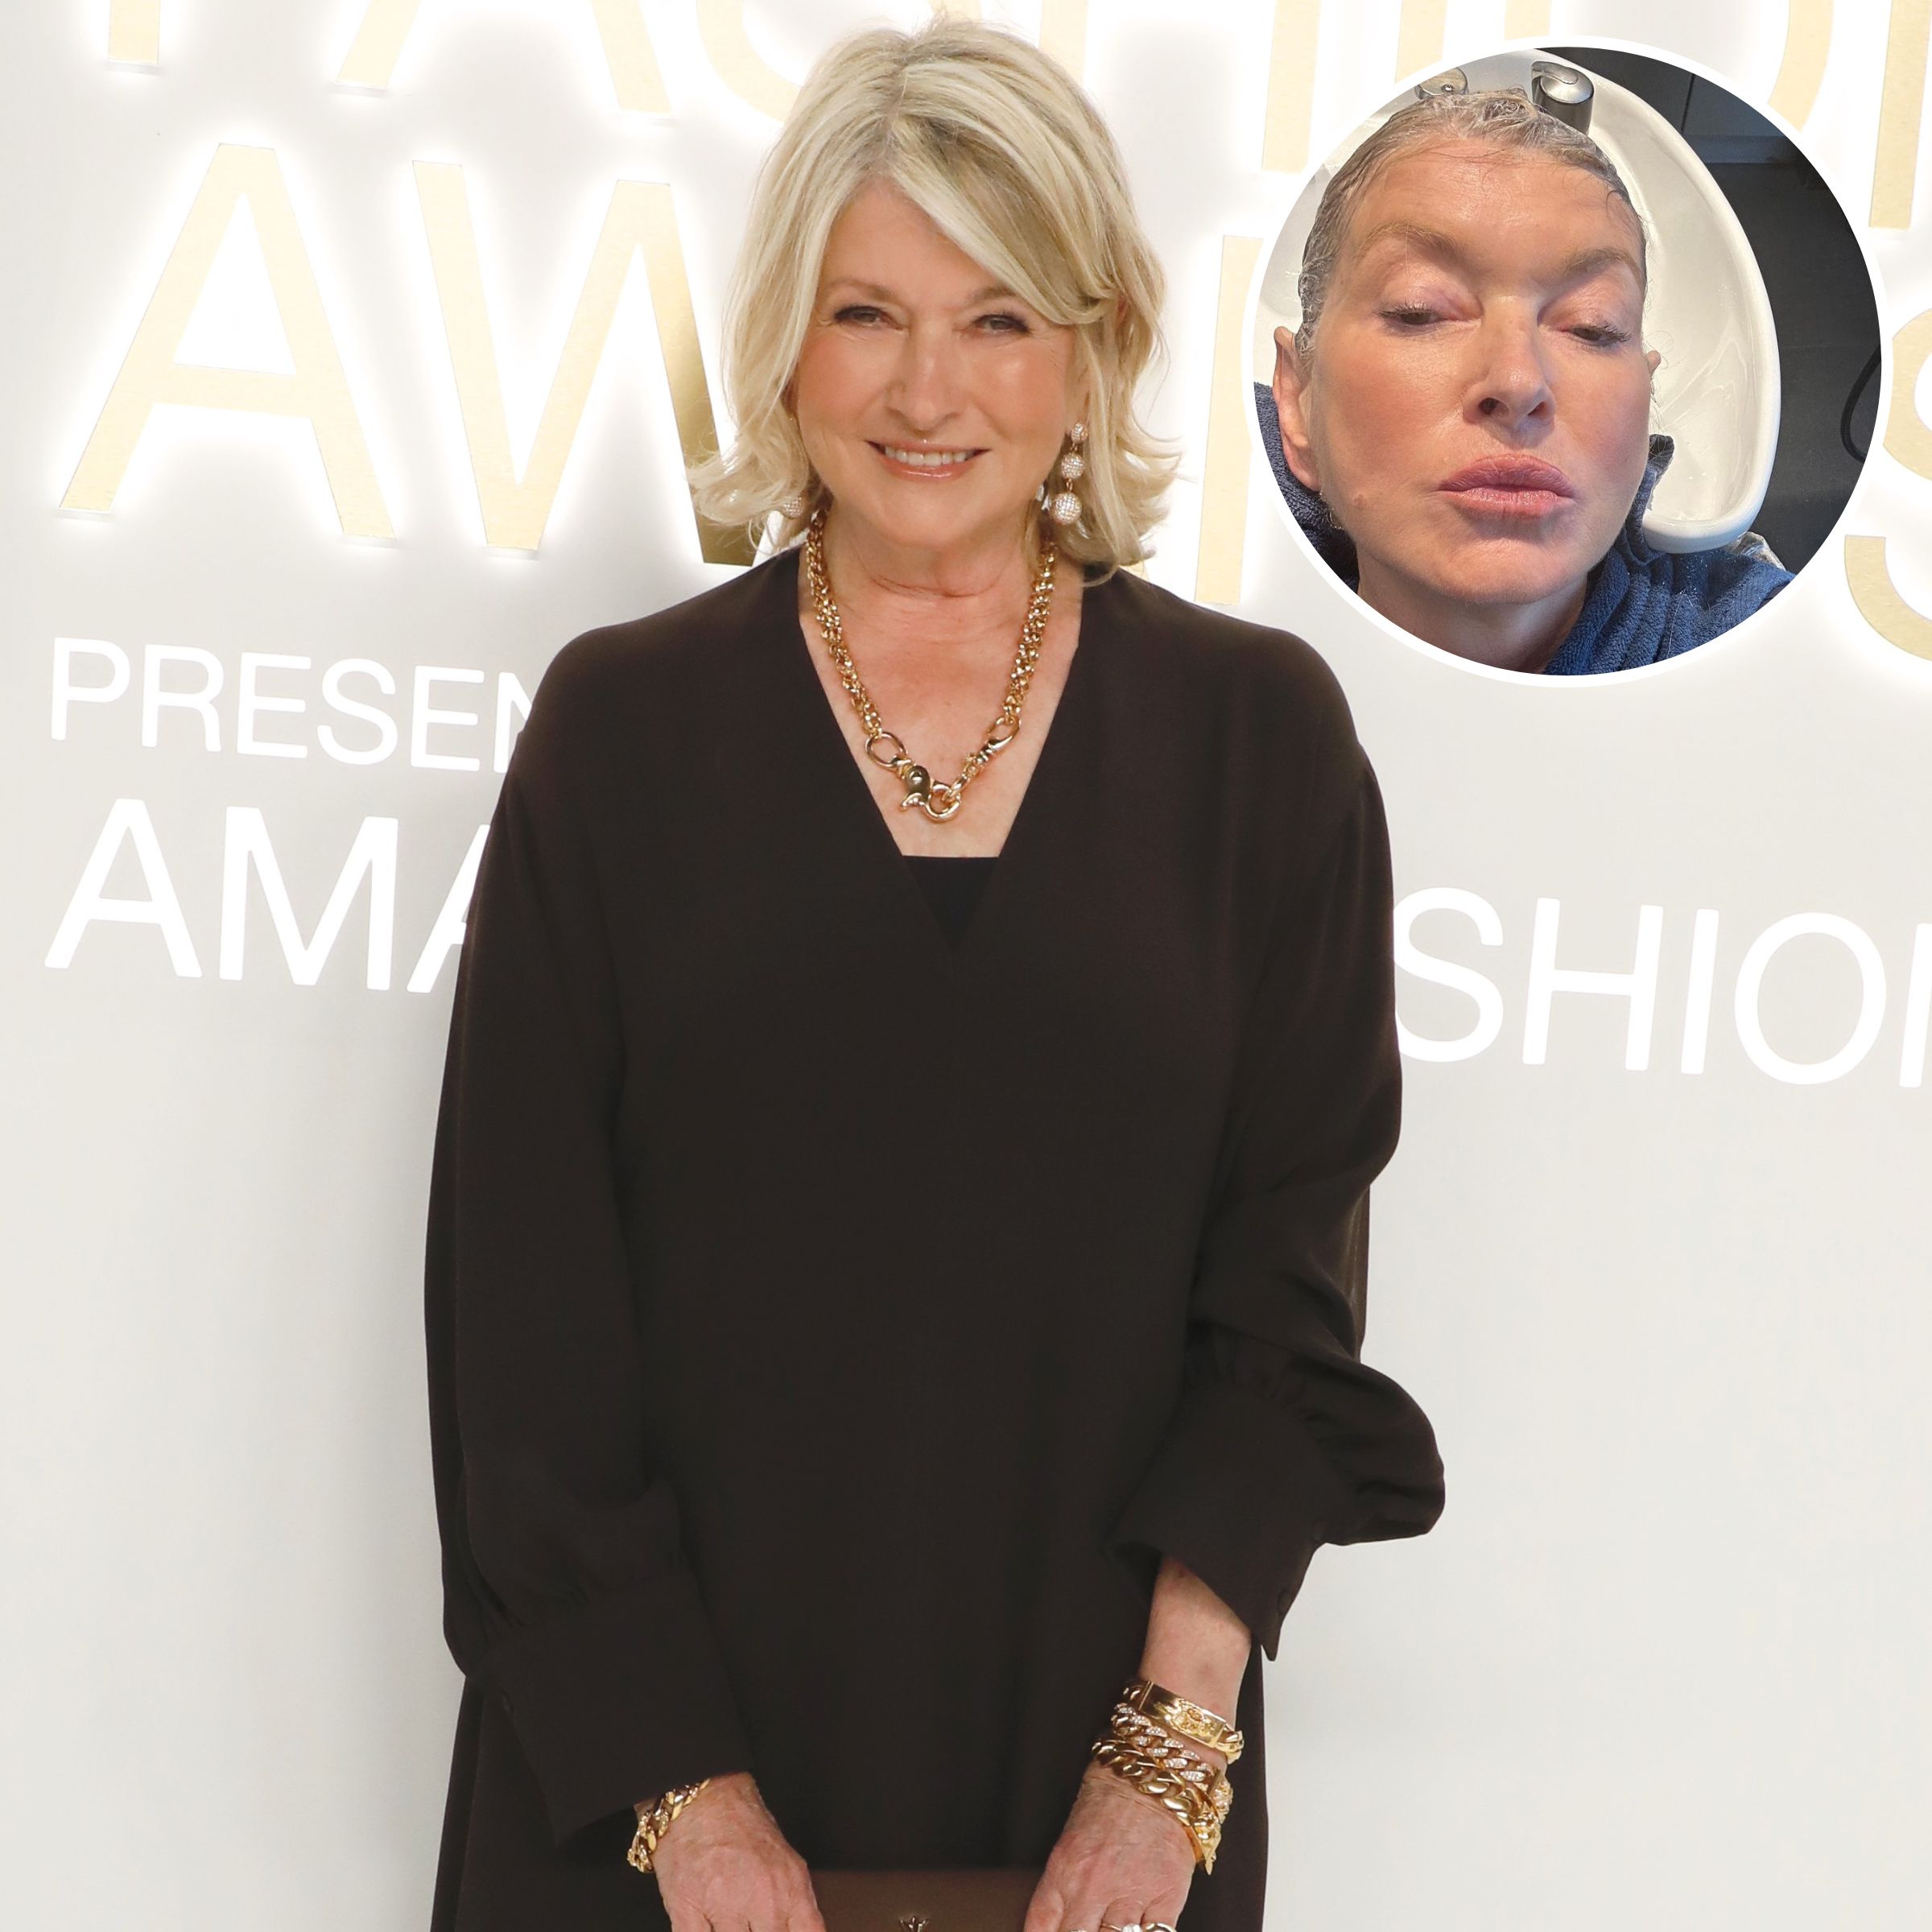 https://www.closerweekly.com/wp-content/uploads/2023/01/Did-Martha-Stewart-Get-Plastic-Surgery-Photos-Skincare.jpg?fit=2400%2C2400&quality=86&strip=all